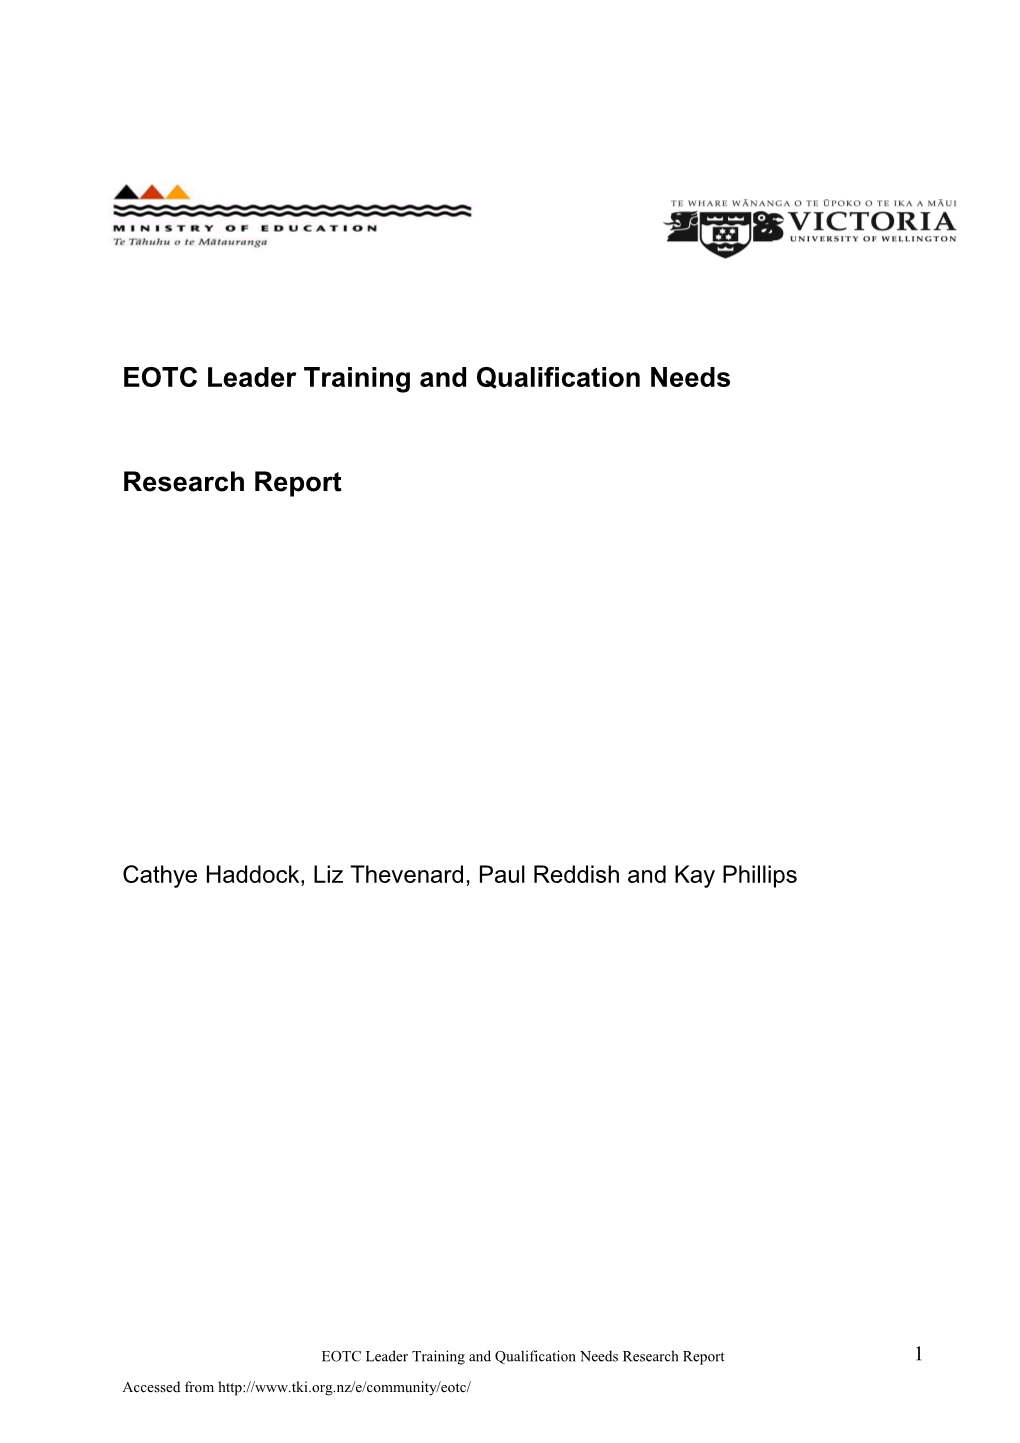 EOTC Leader Training and Qualification Needs